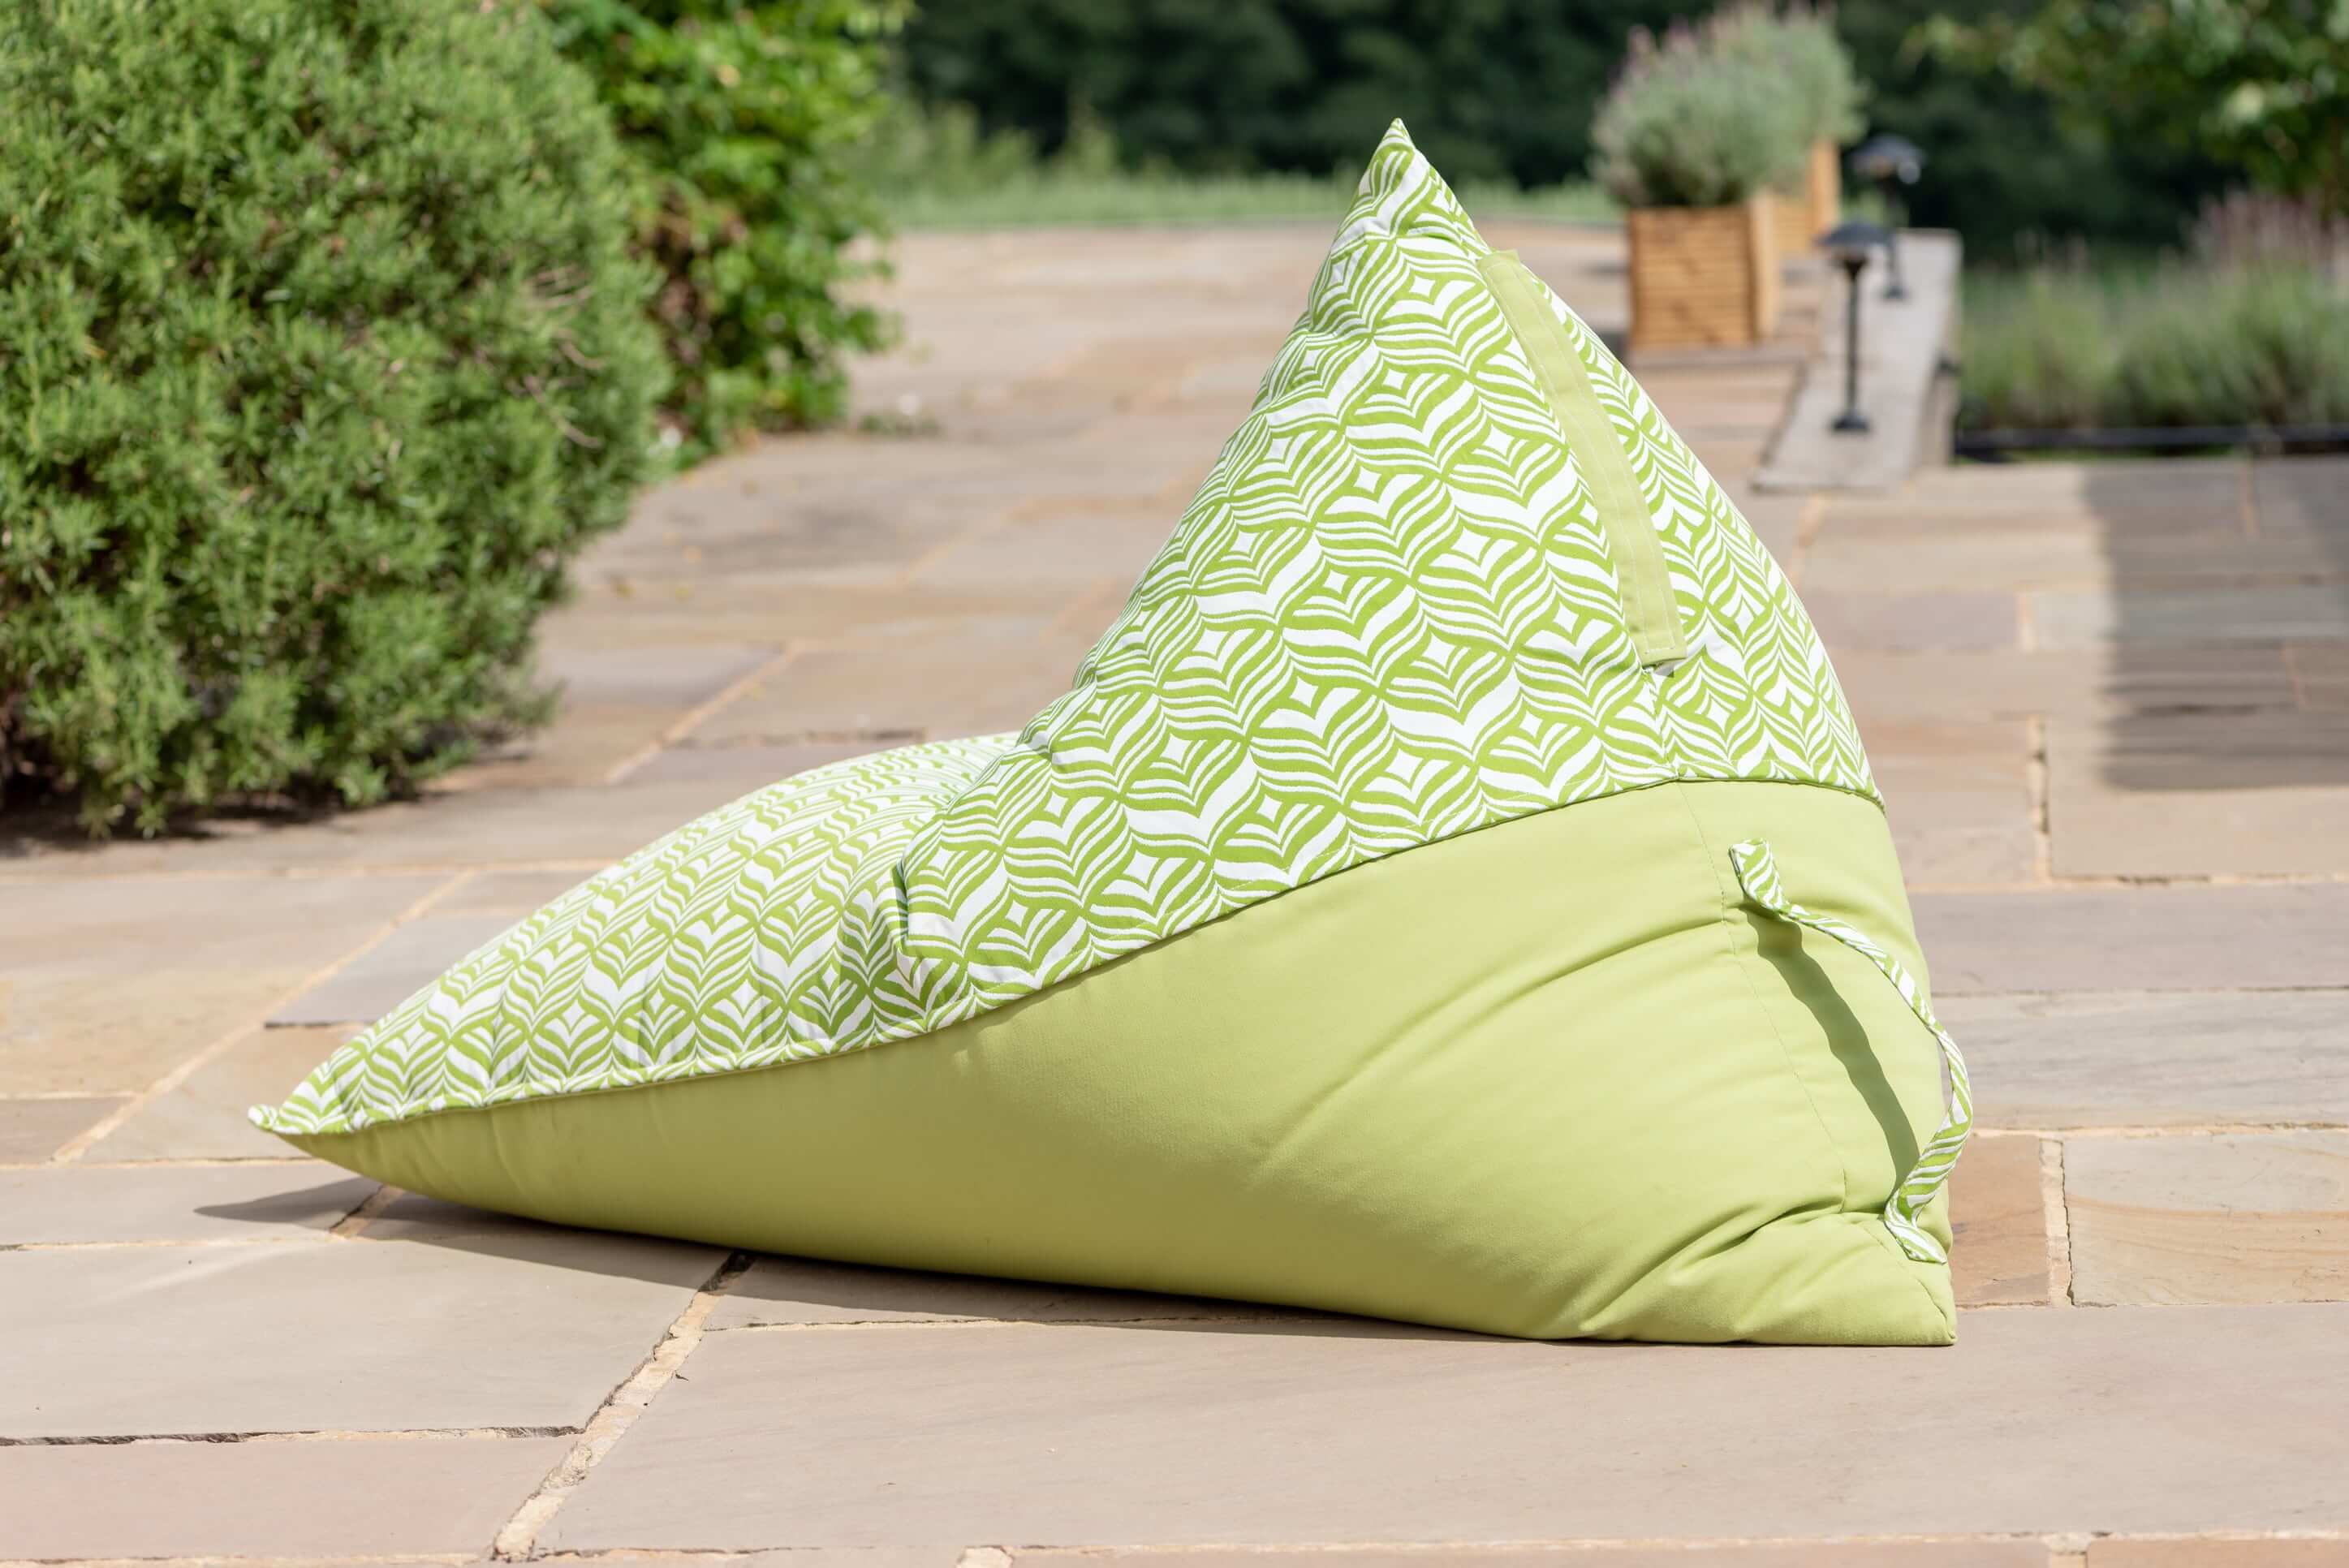 Lime Green outdoor bean bag lounger sat invitingly on the graden patio in the glorious sunshine